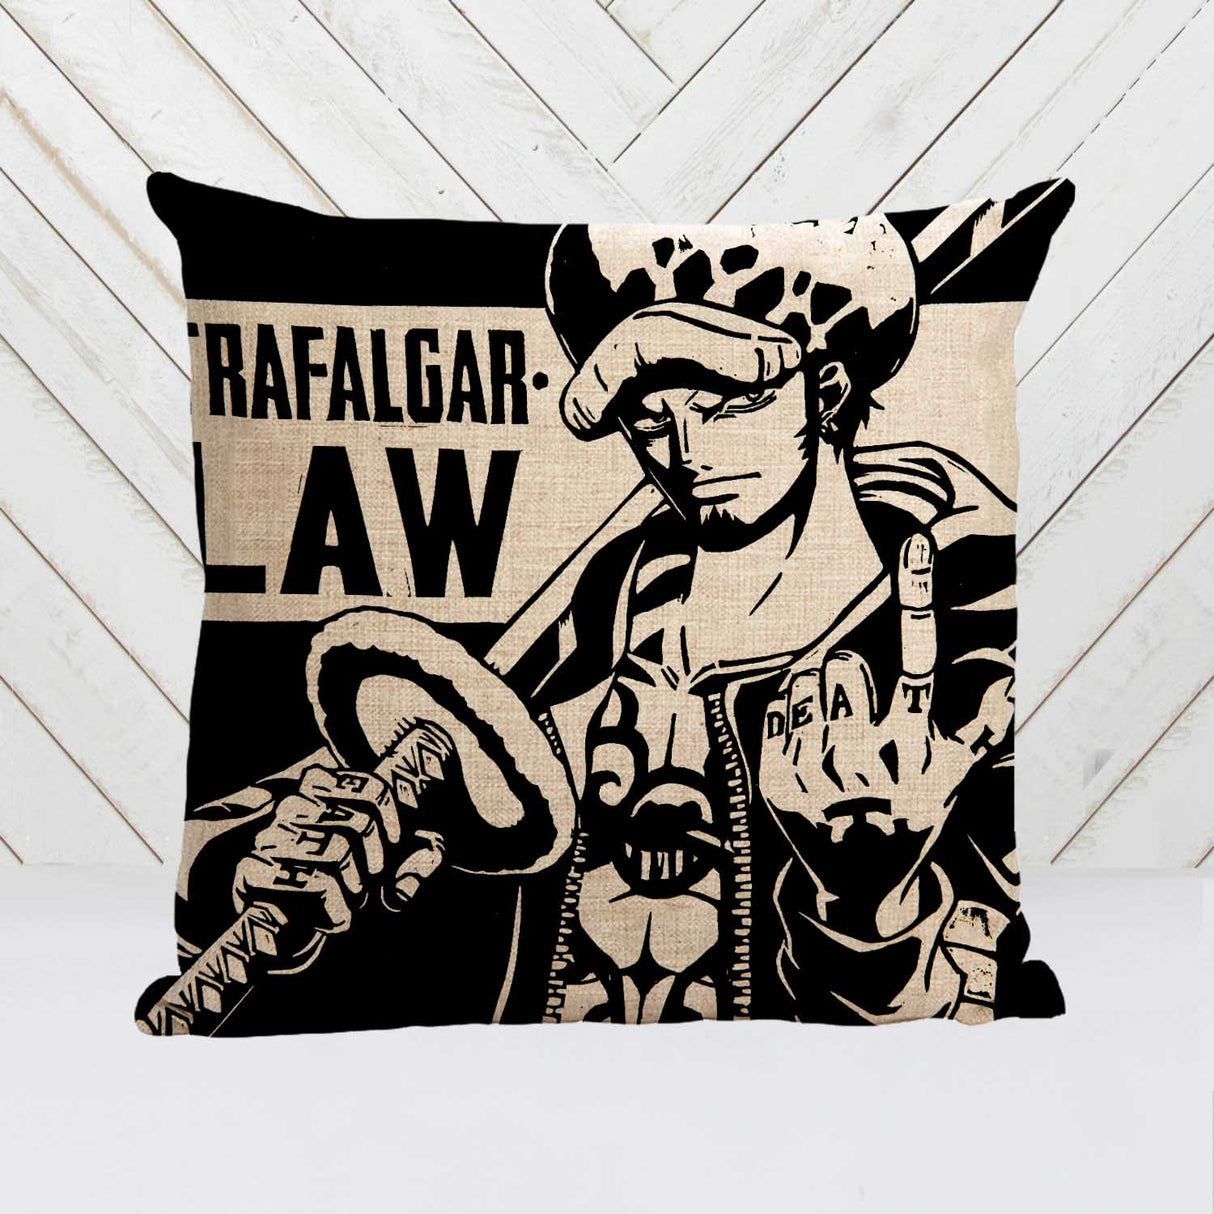 One Piece Pillow Covers